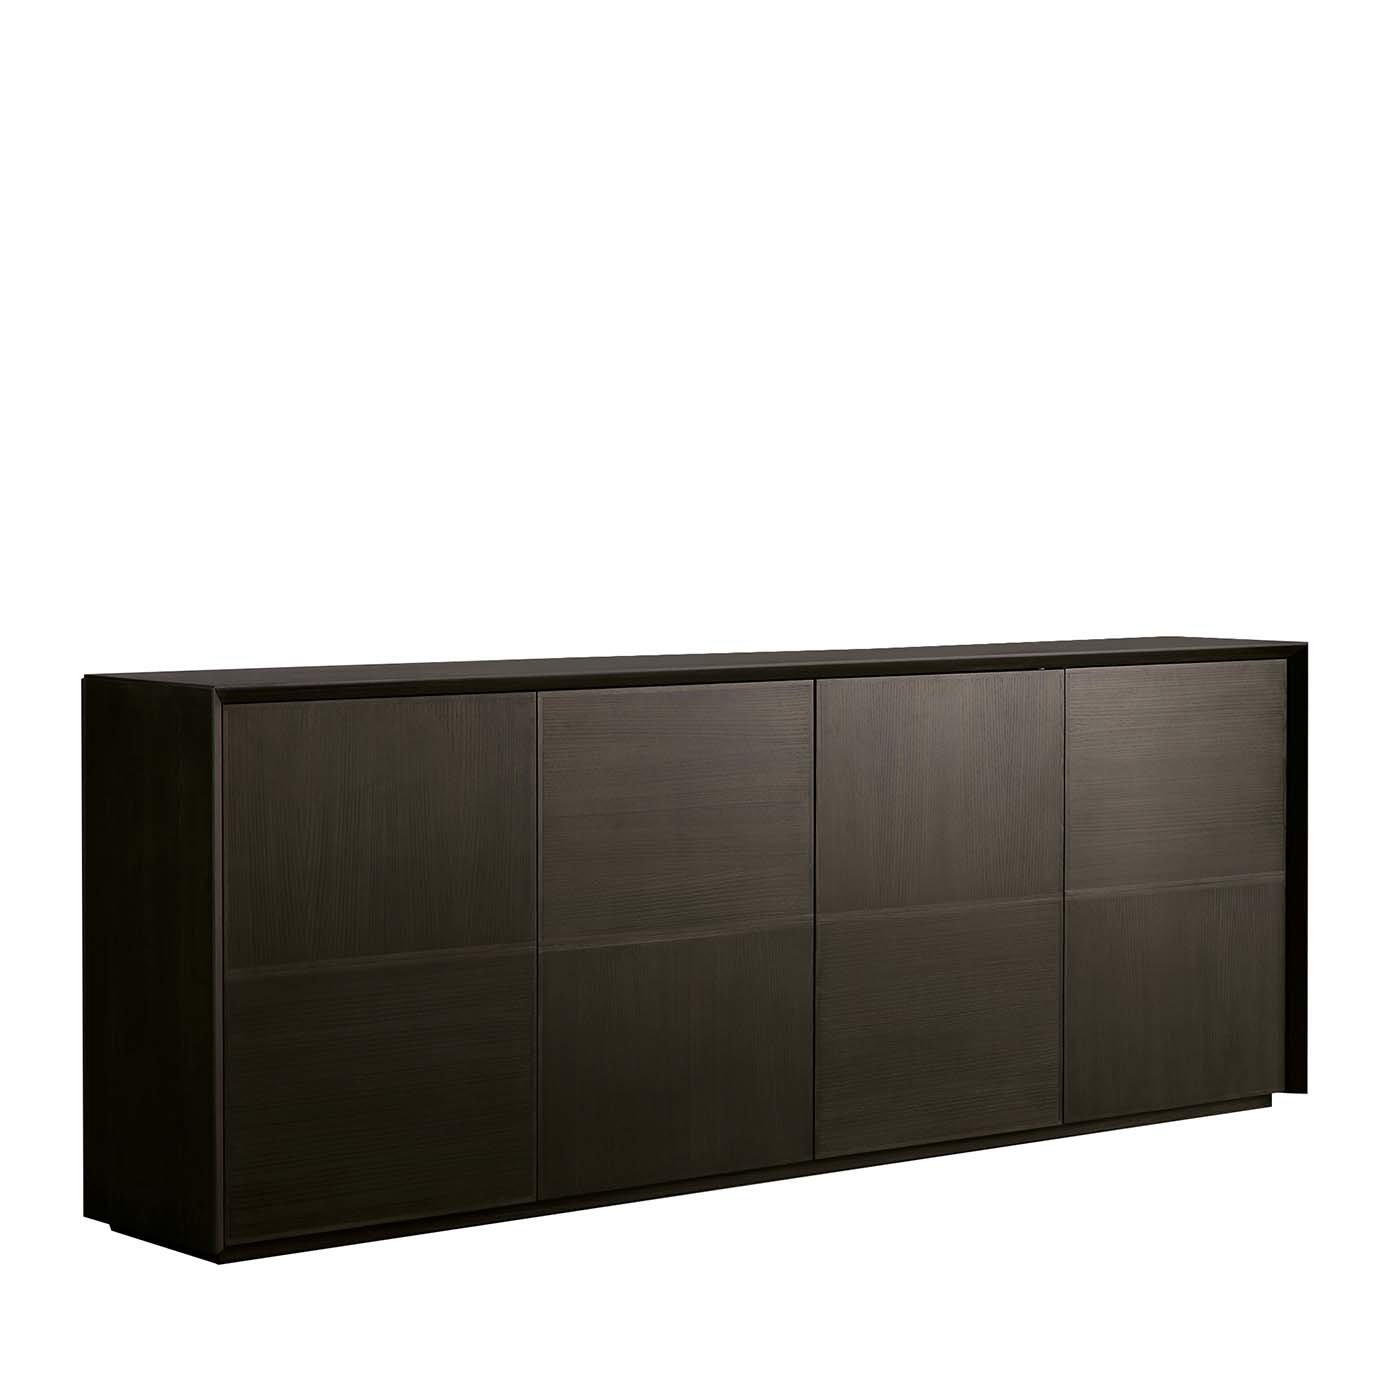 Flair Sideboard by Giuliano Cappelletti - Main view